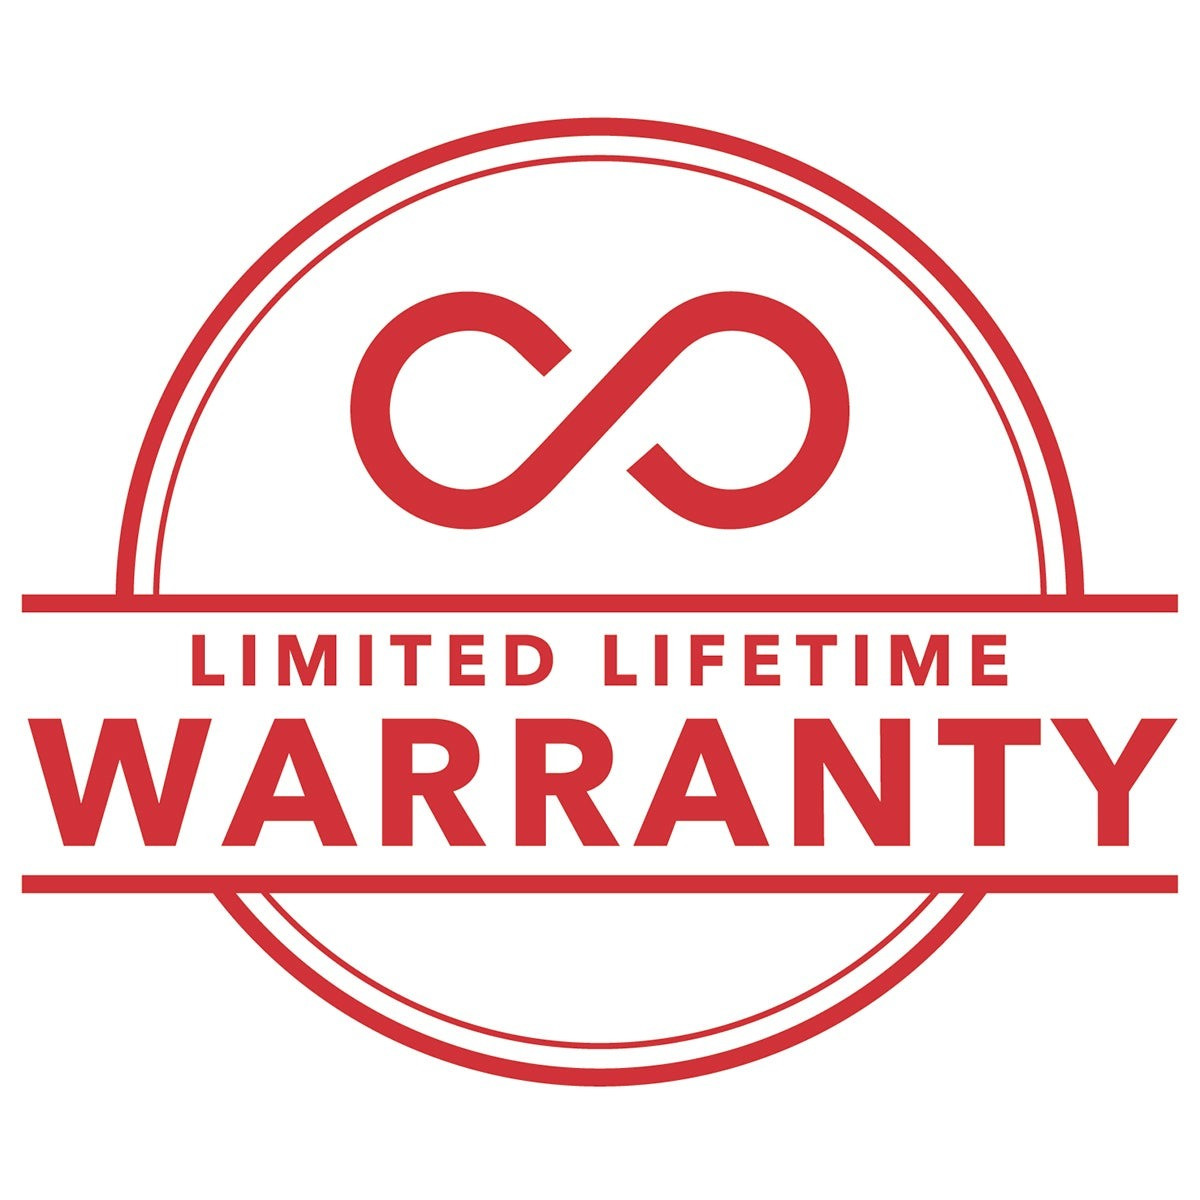 Limited Lifetime Warranty
|| If your case ever gets worn or damaged, we will replace it for as long as you own your device (Shipping & Handling Applies)